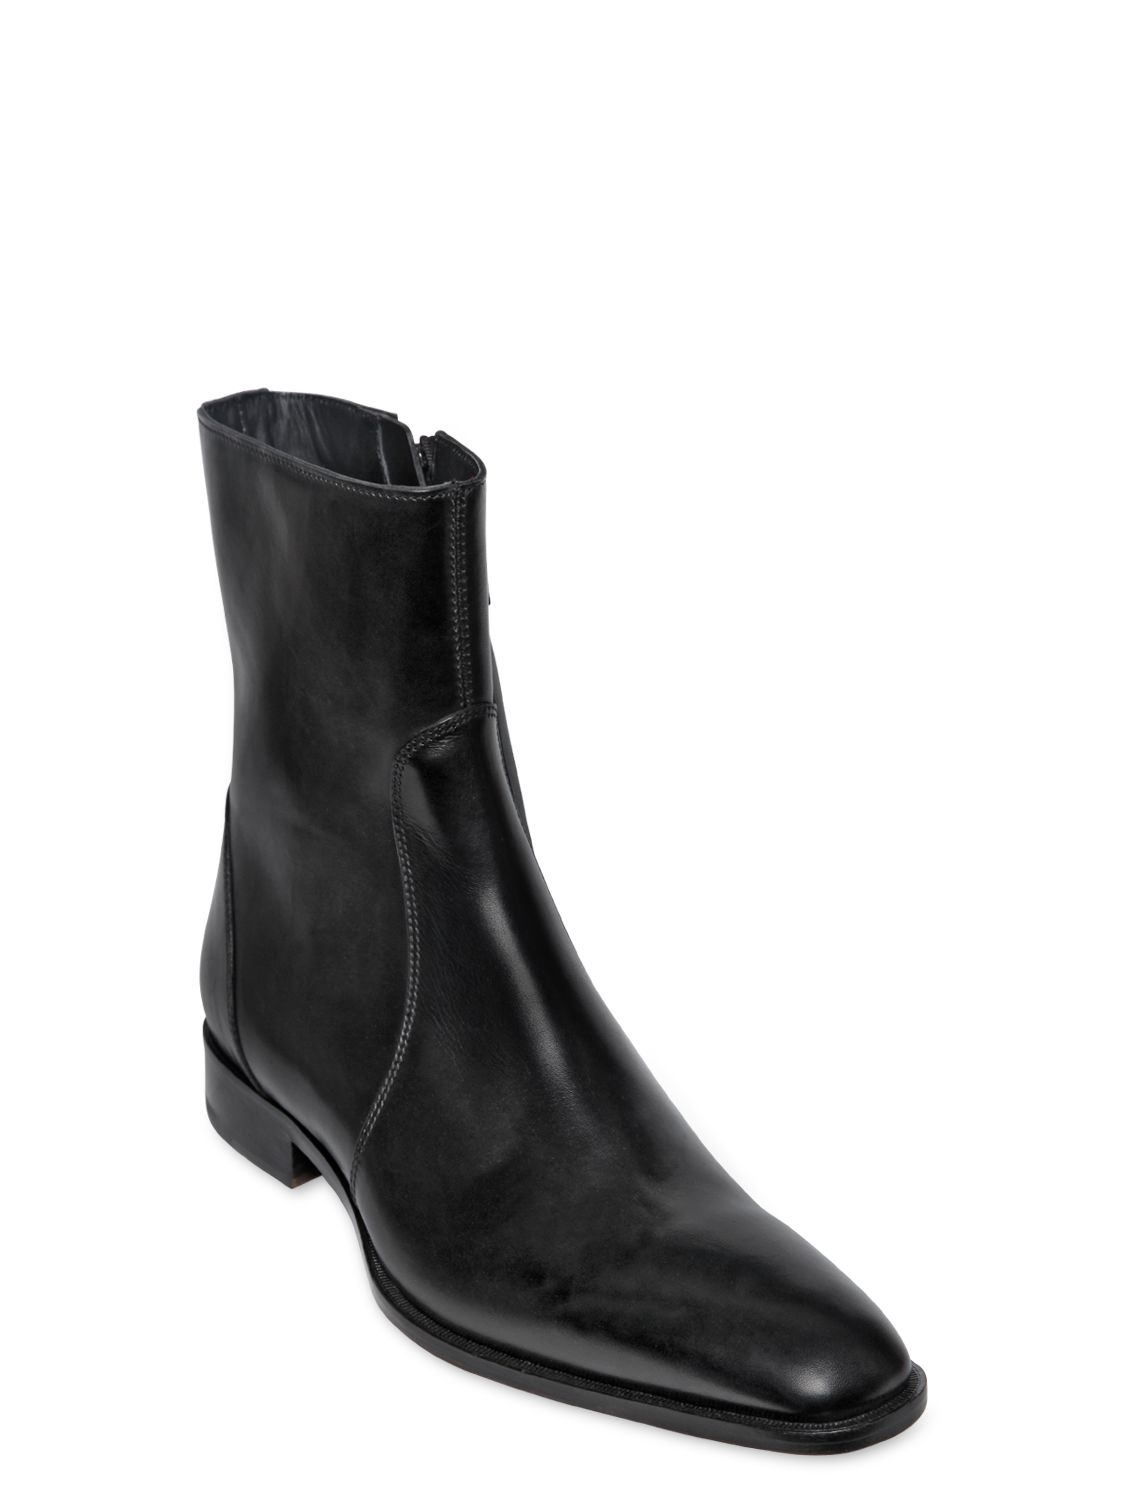 Lyst - Dsquared² Bond Street Brushed Leather Boots in Black for Men